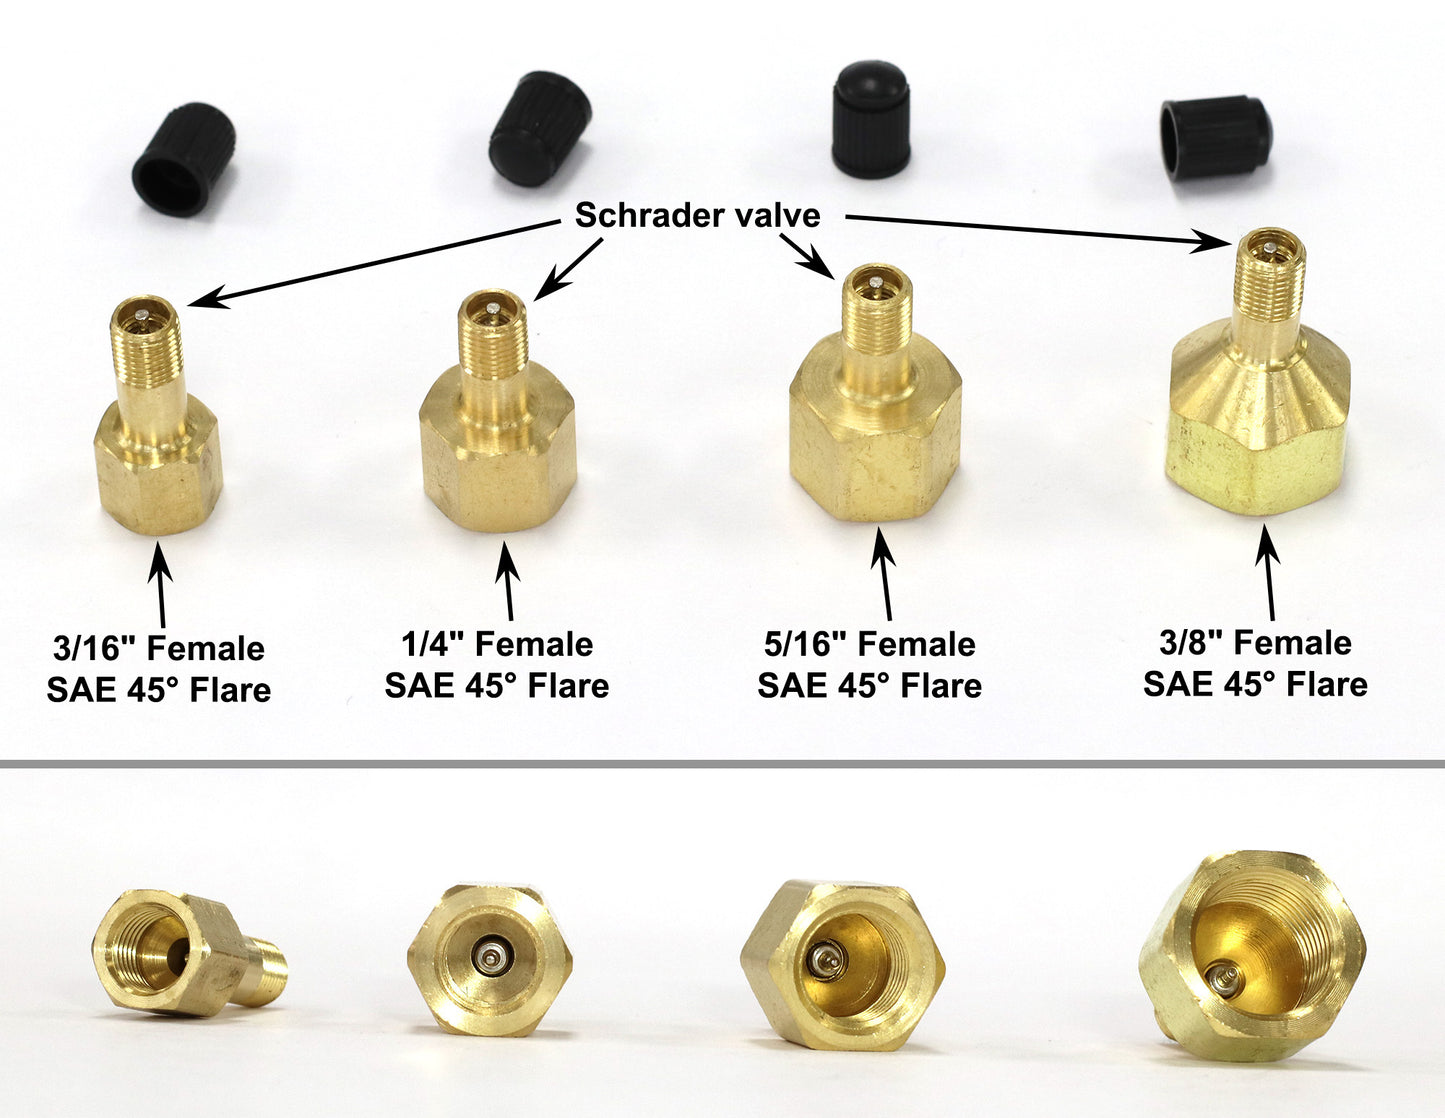 Schrader Valve to SAE 45-degree Flare Fittings | Adapter to Winterize Backflow Preventer and Pressure Vacuum Breaker (PVB) for Sprinkler System by Blowout Method Using Air Compressor, Lead-Free Brass